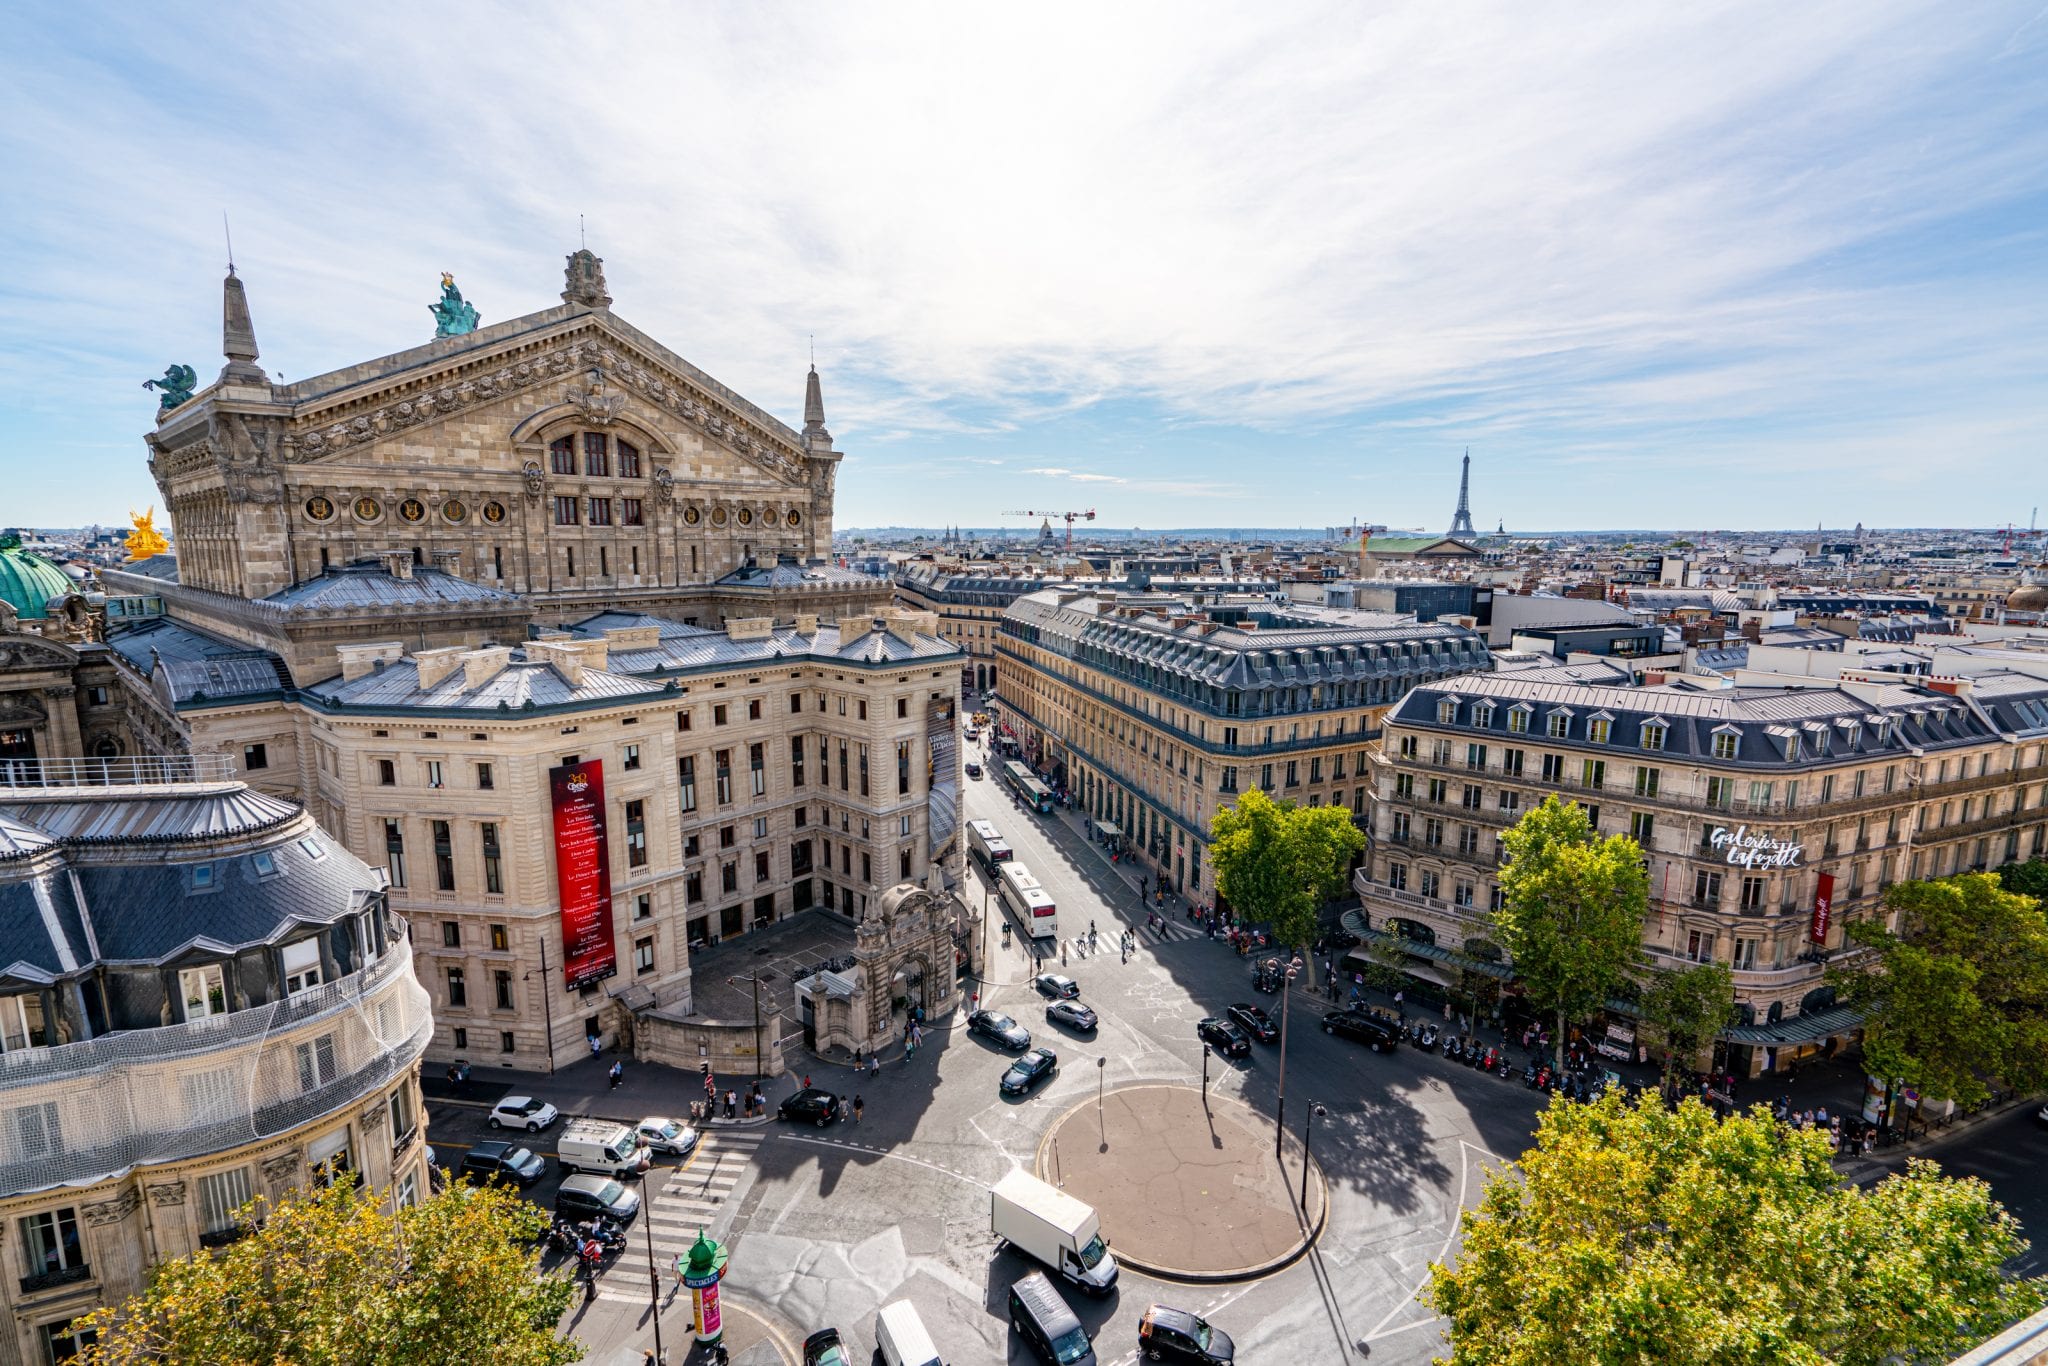 View of Paris Opera House and Eiffel Tower from rooftop of Galeries Lafayette, one of the best instagram spots in Paris